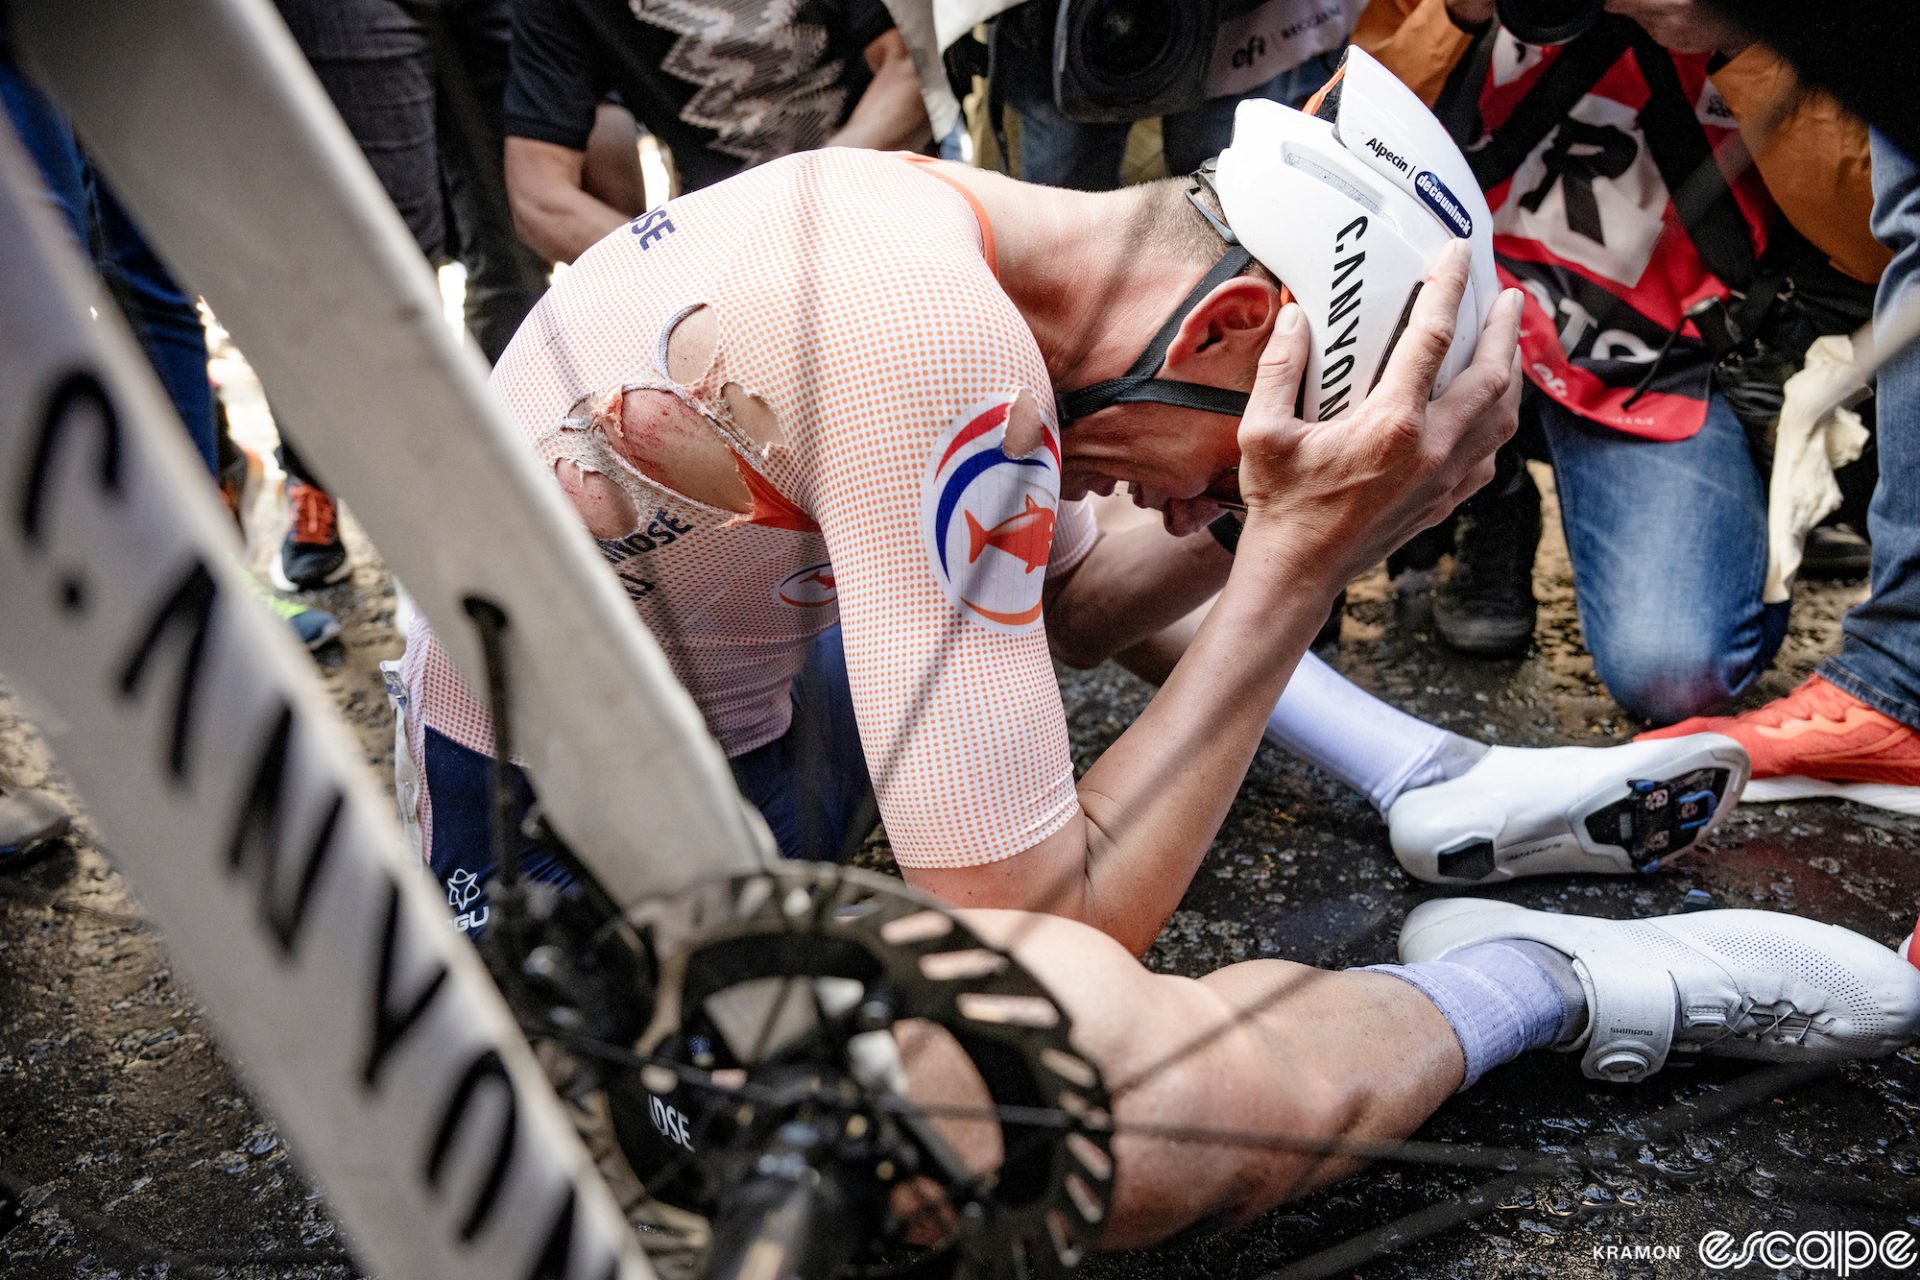 Mathieu van der Poel holds his head in his hands as he sits on the pavement after winning the World Road Championship. His bike's fork frames the picture as he's seen through the spokes of the wheel. His jersey is torn and he is wet and dirty from the racing and a late crash.